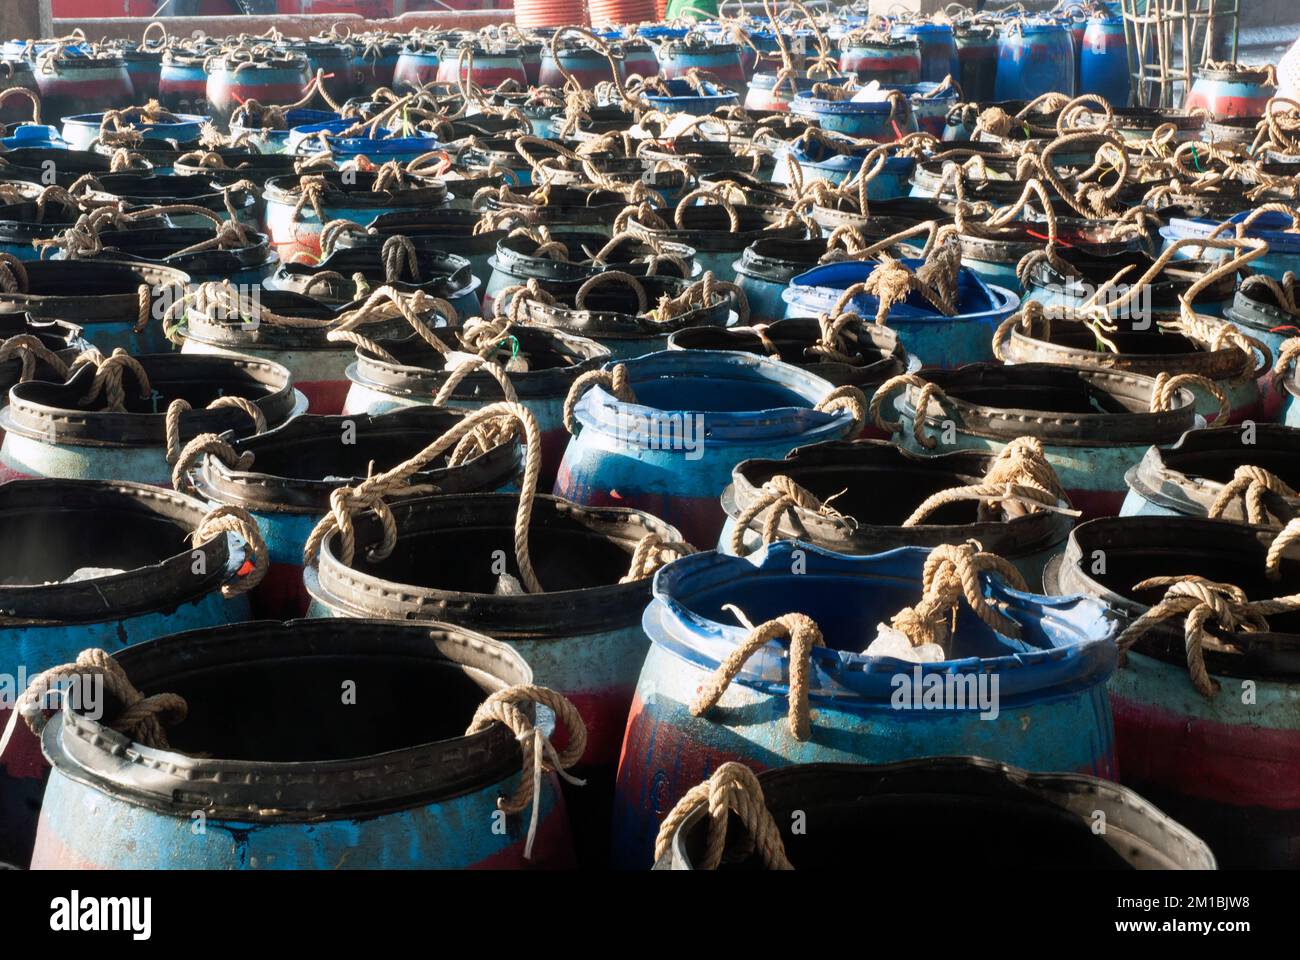 https://c8.alamy.com/comp/2M1BJW8/worker-is-working-on-fishing-tanks-at-talaythai-seafood-market-trading-center-of-fish-and-seafood-products-in-samutsakorn-thailand-2M1BJW8.jpg